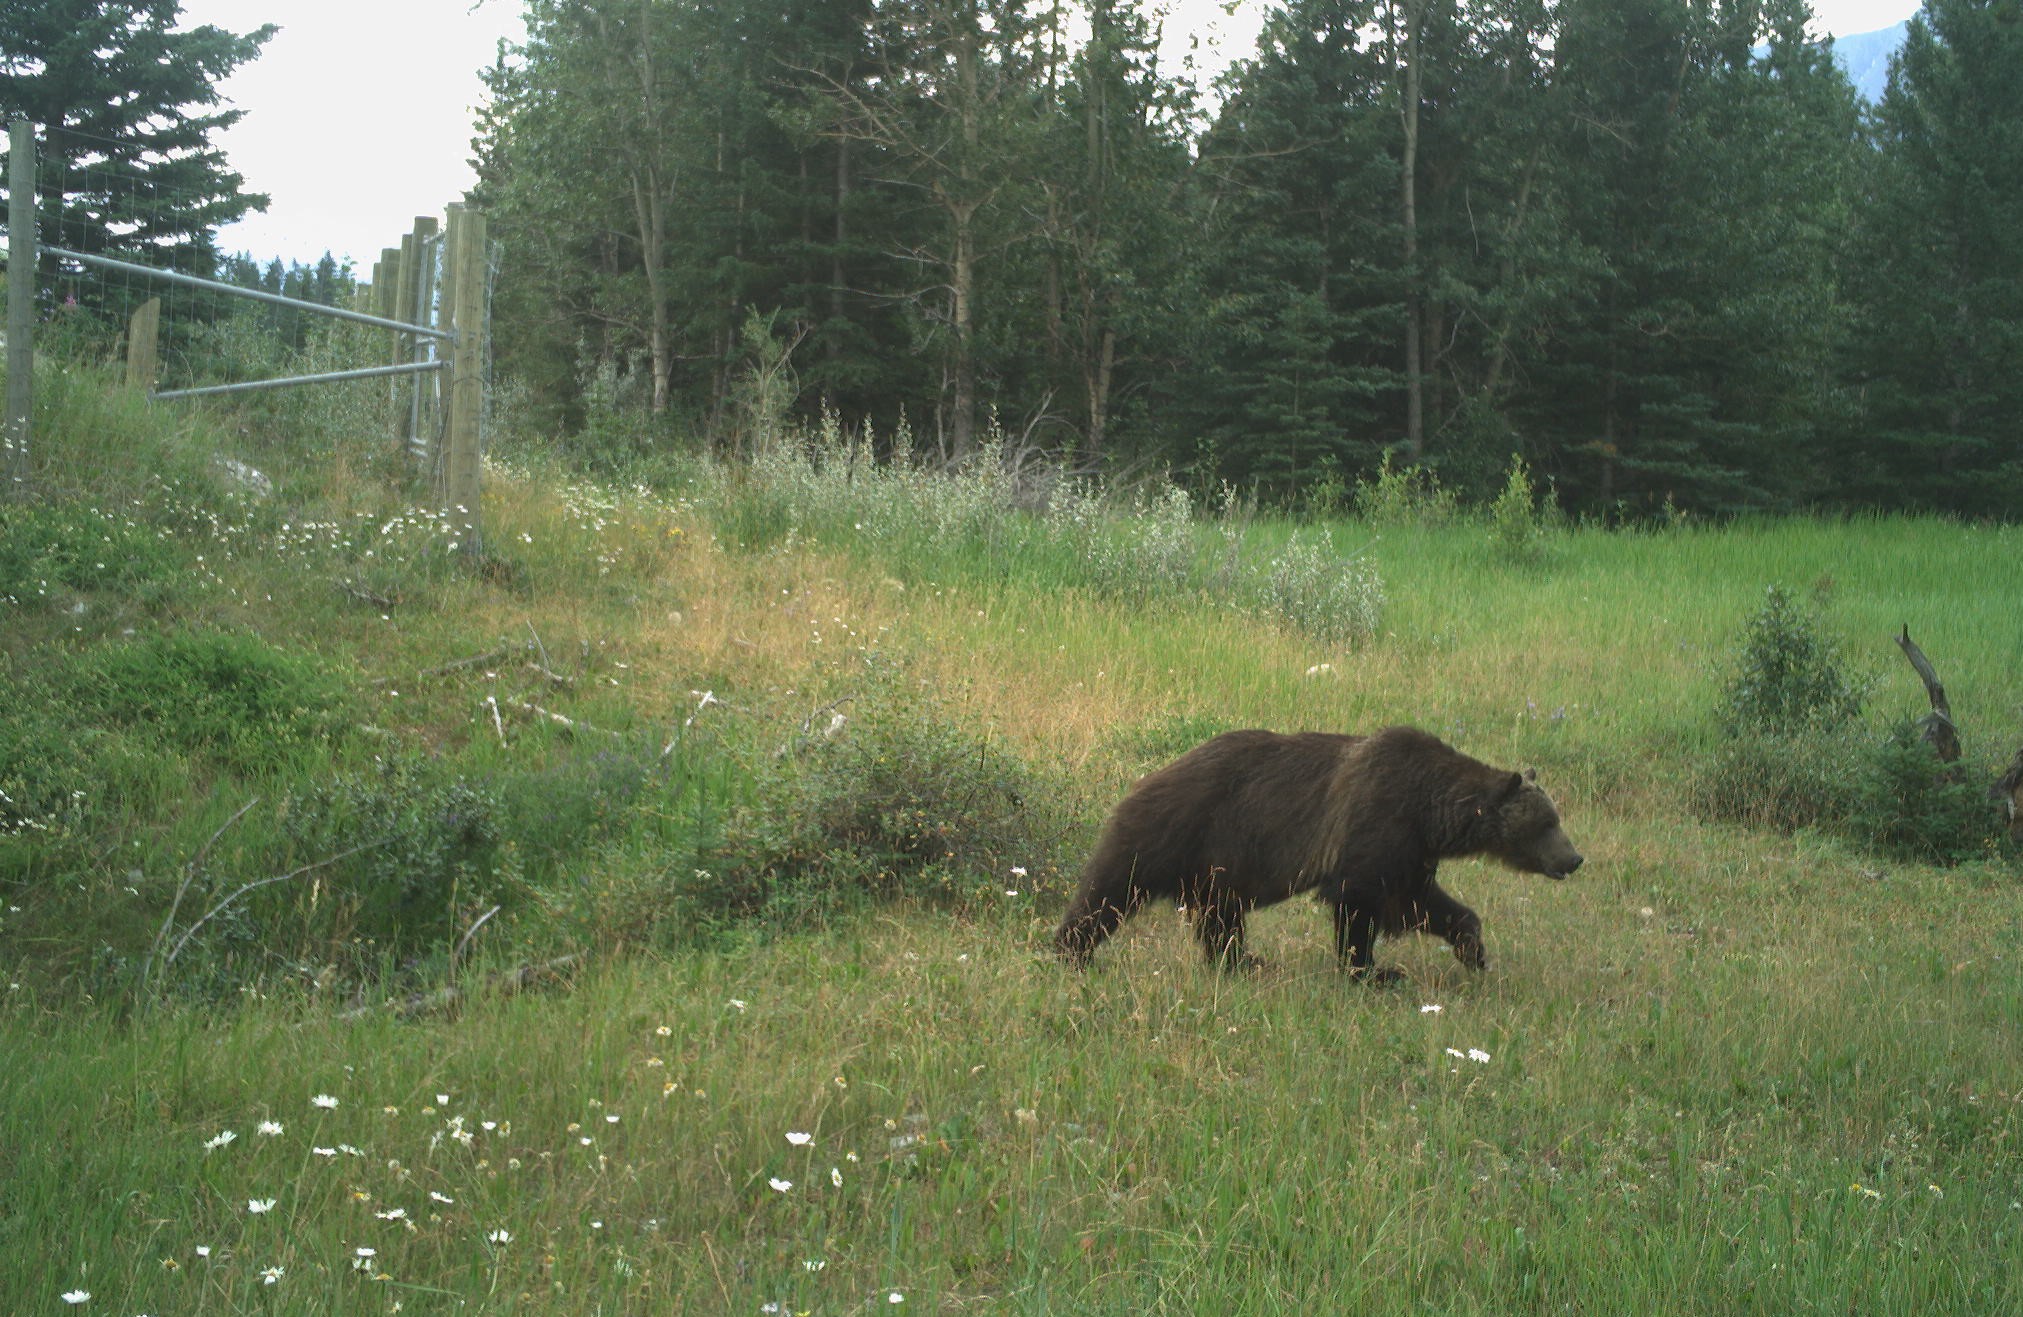 Grizzly bear traversing around the wildlife fence along the Trans-Canada Highway.